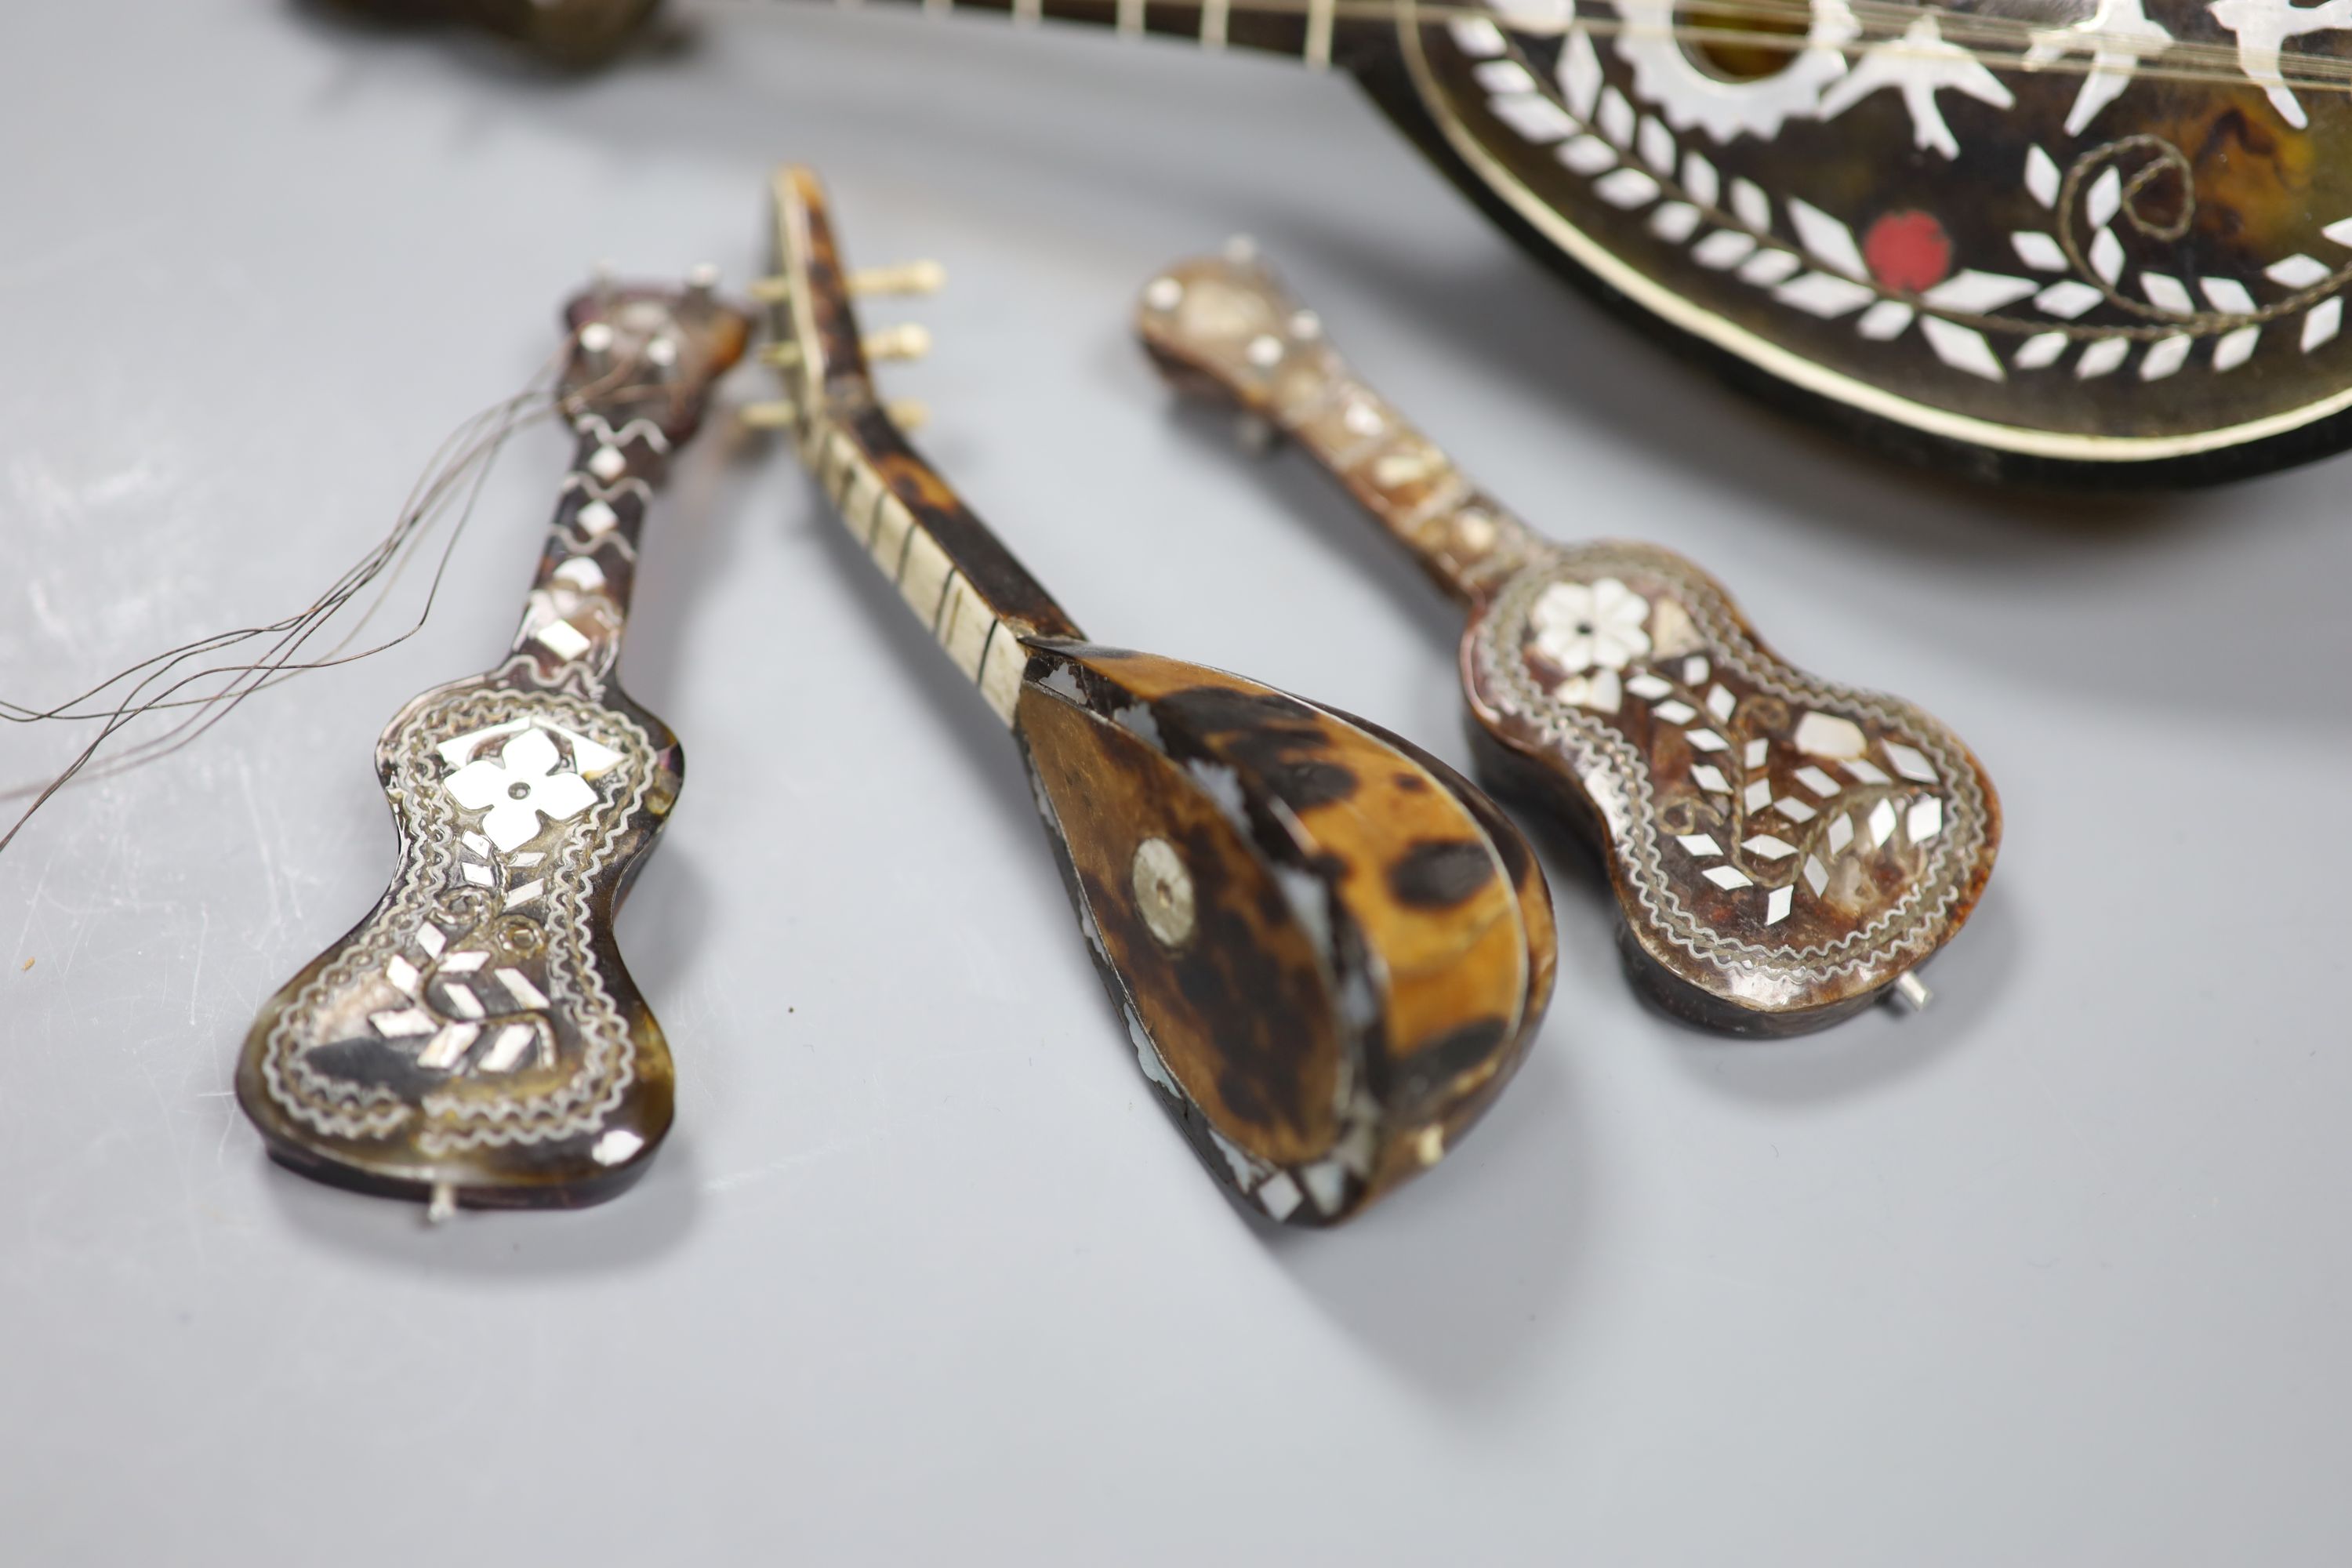 Three miniature tortoiseshell guitars and lute and a larger musical lute